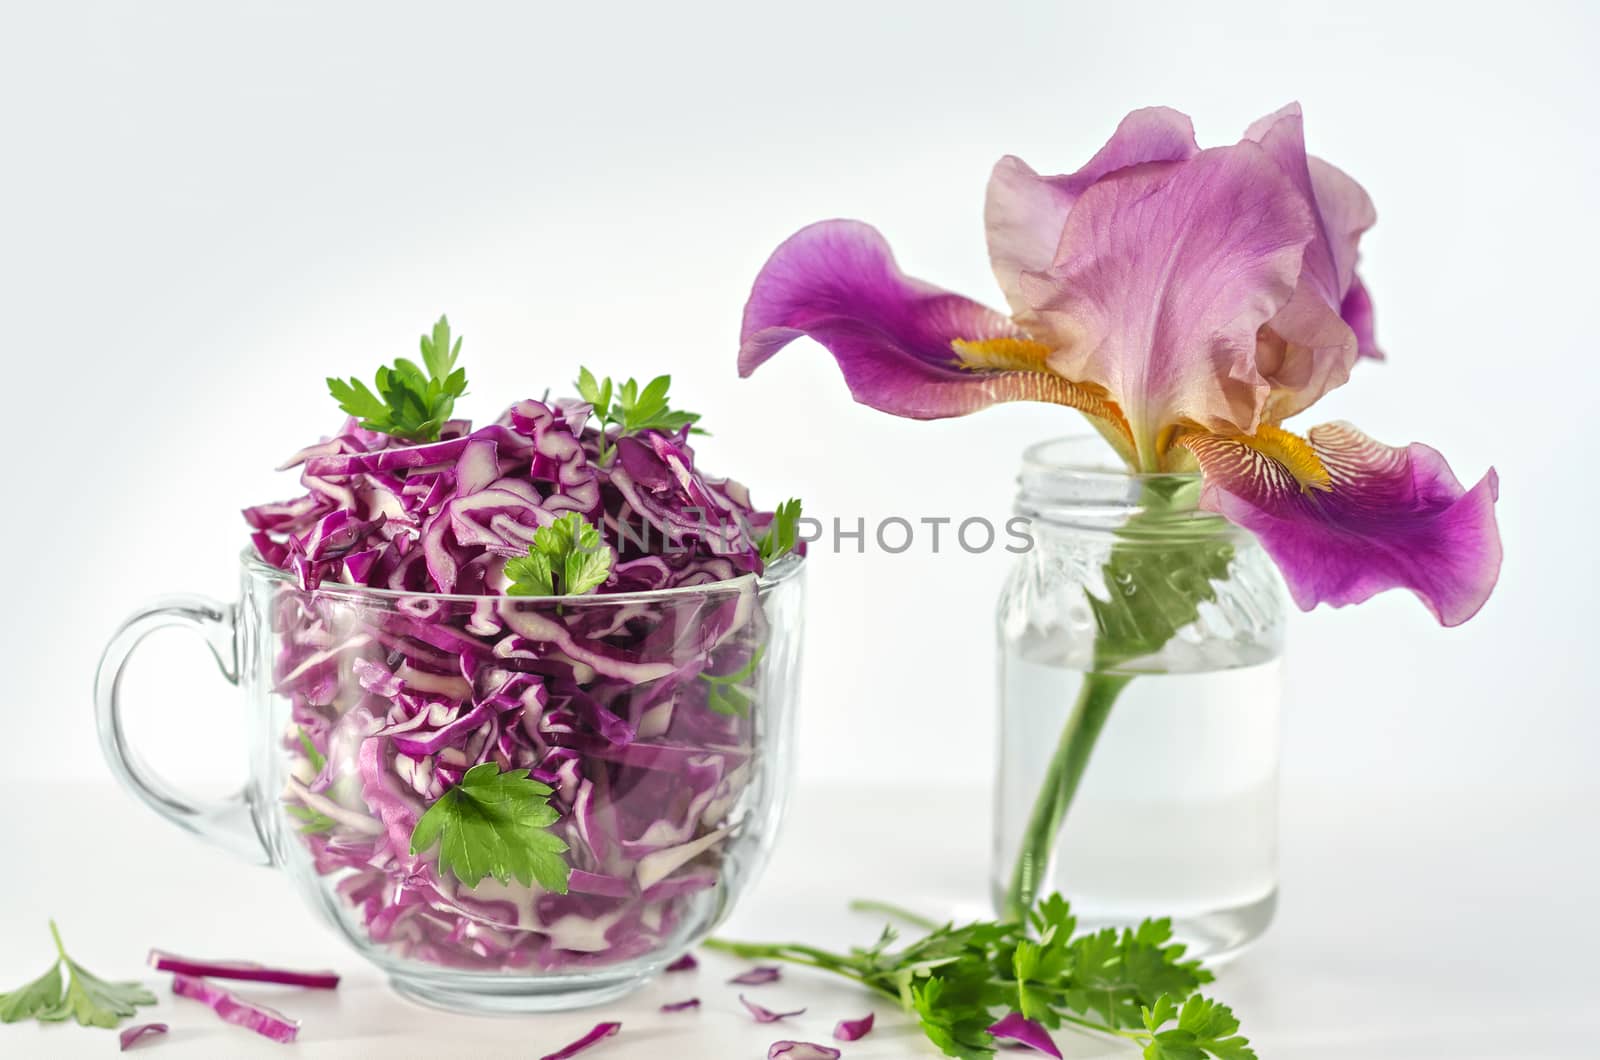 Salad of red cabbage with parsley and flower in the pot. Morning light from the window, and on a white background.